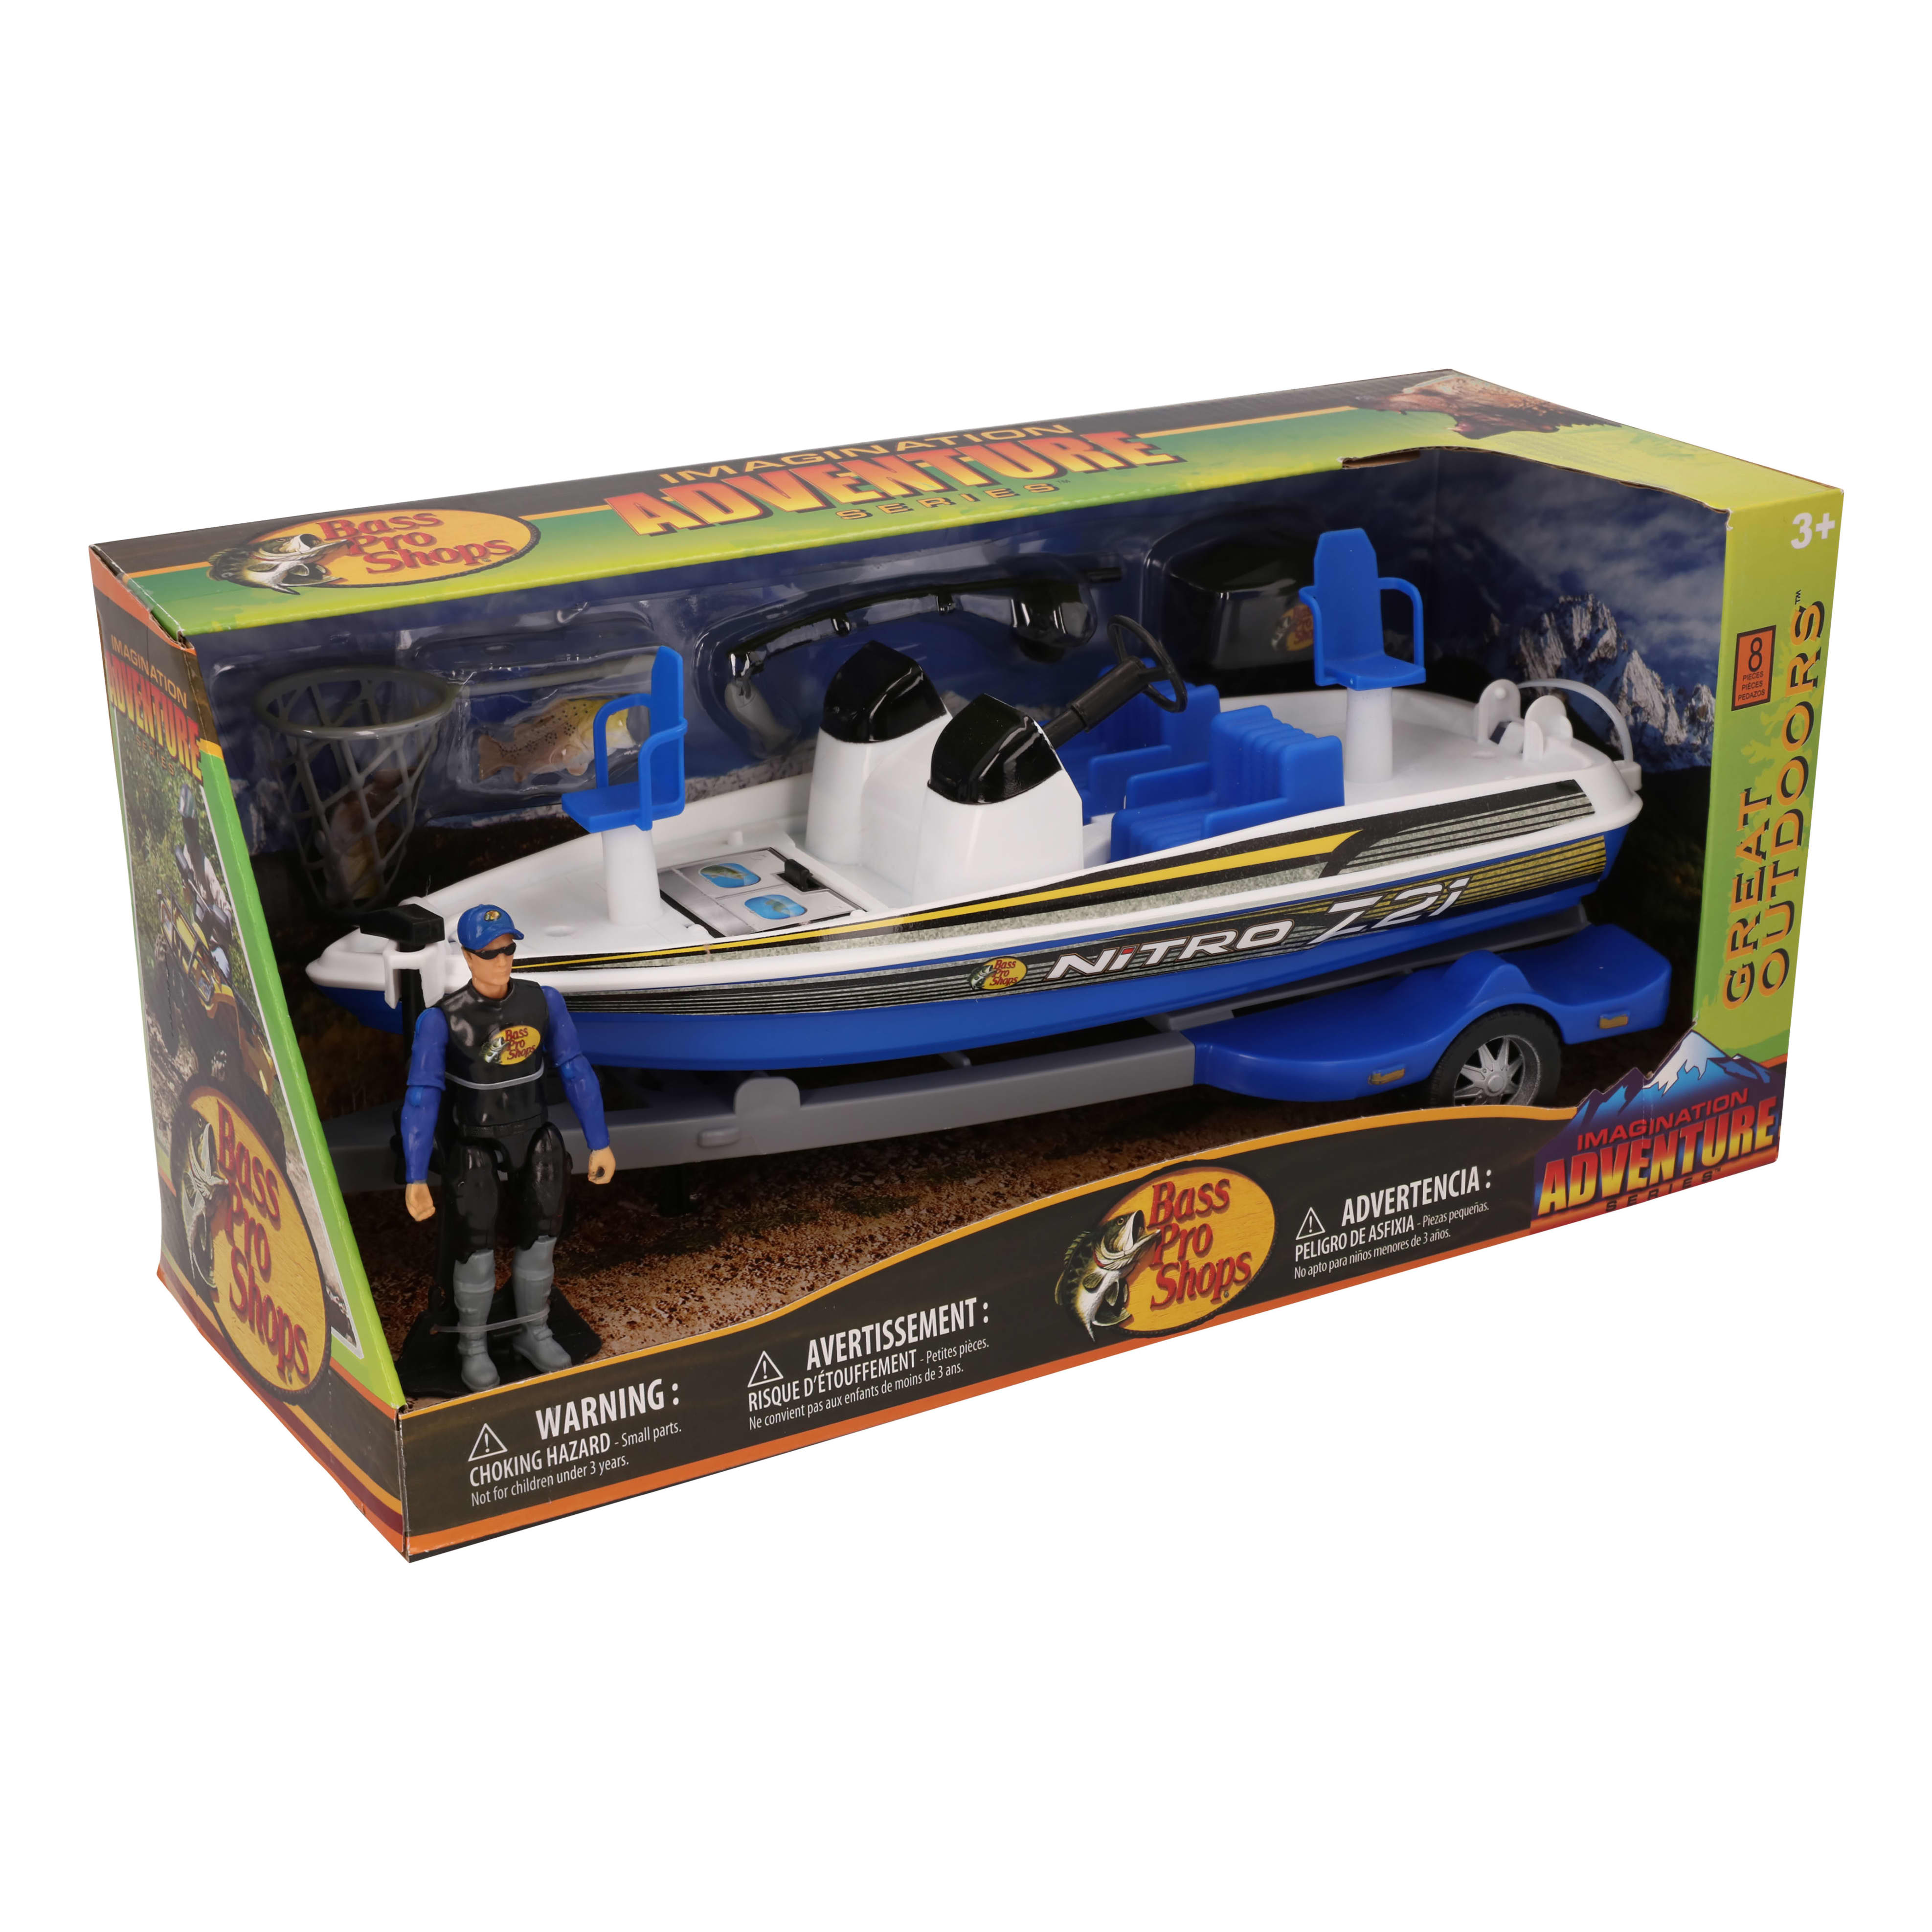 Bass Pro Shops® Her Imagination Adventure Side-by-Side Play Set for Kids